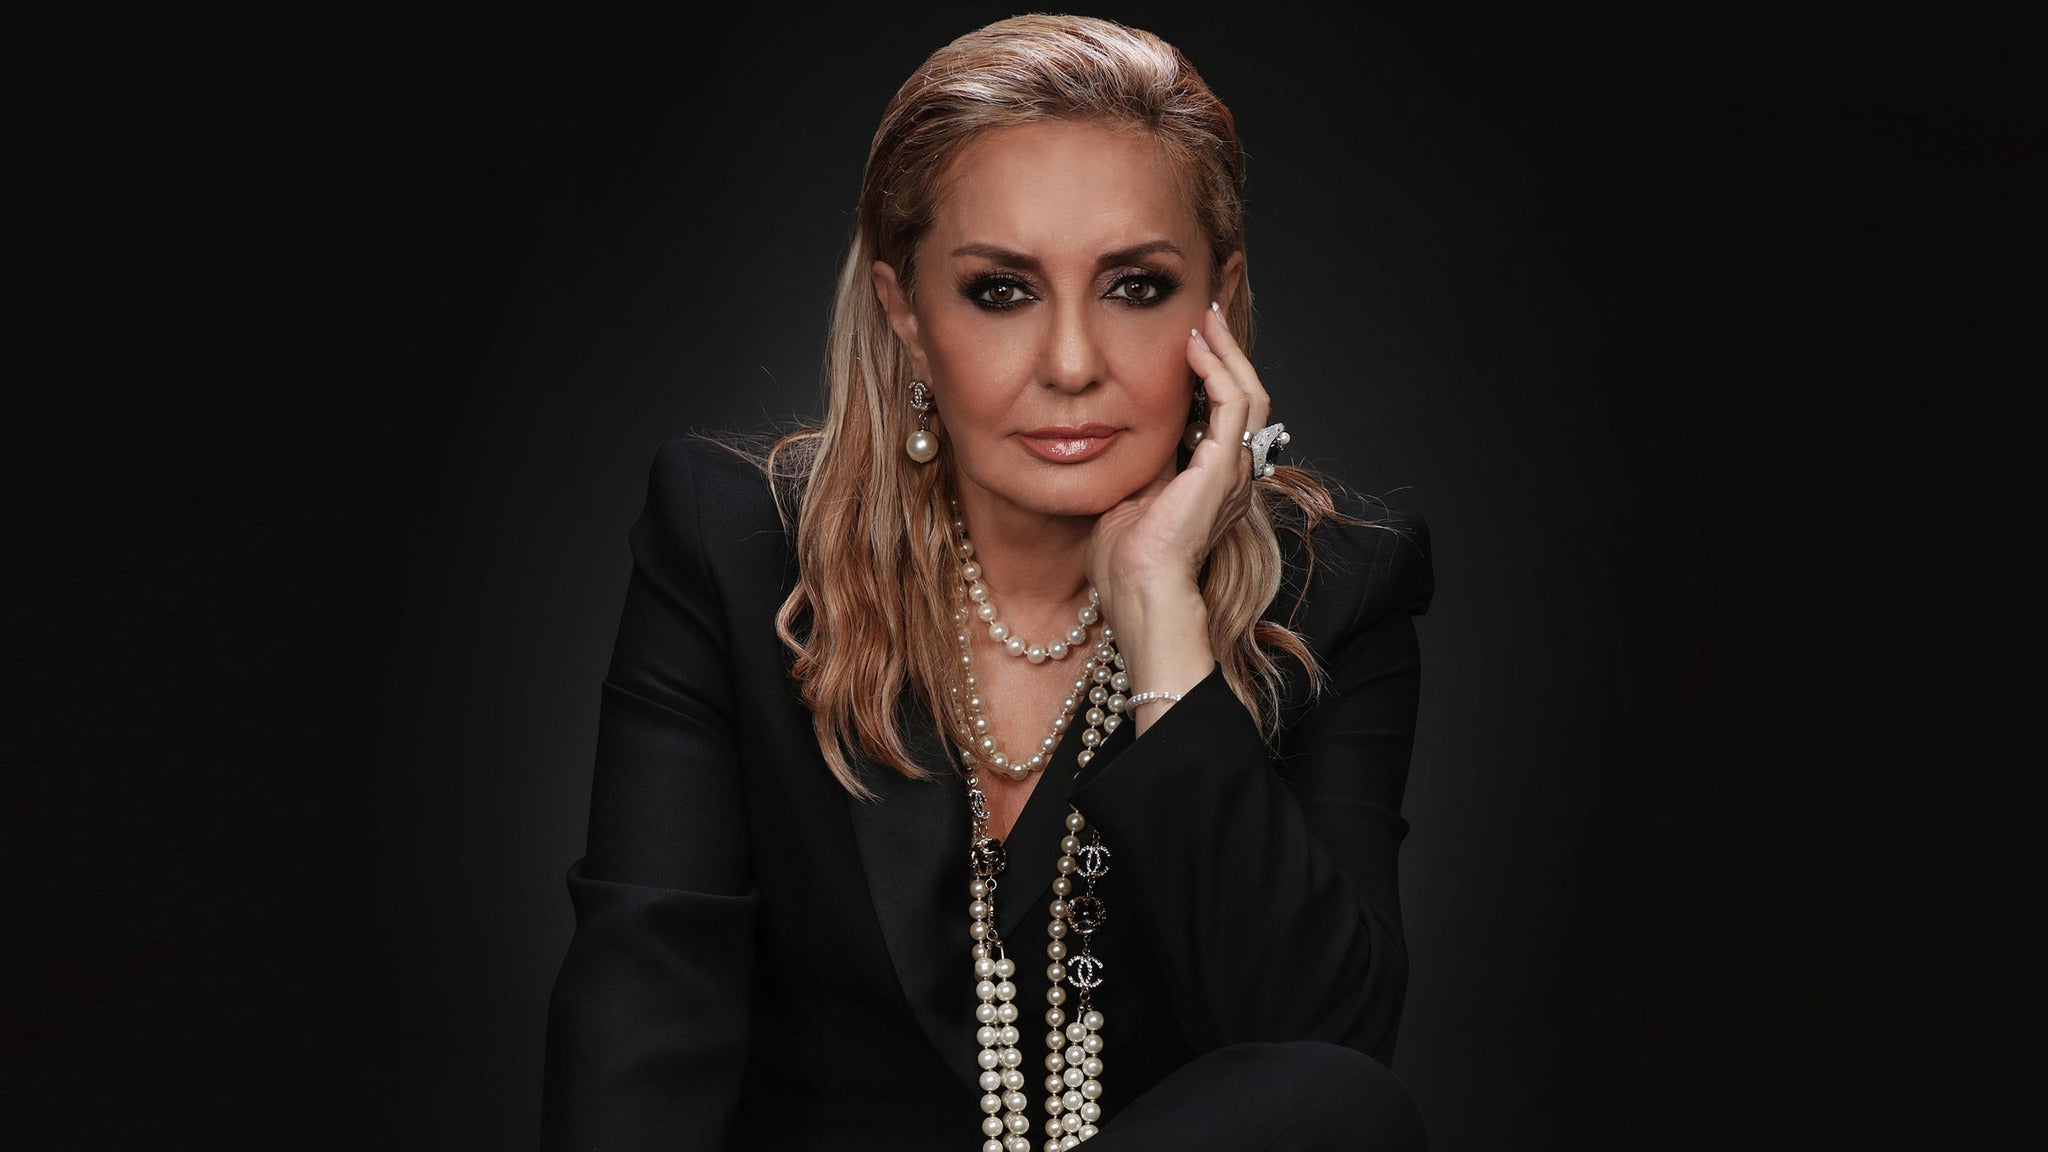 Image used with permission from Ticketmaster | Googoosh tickets